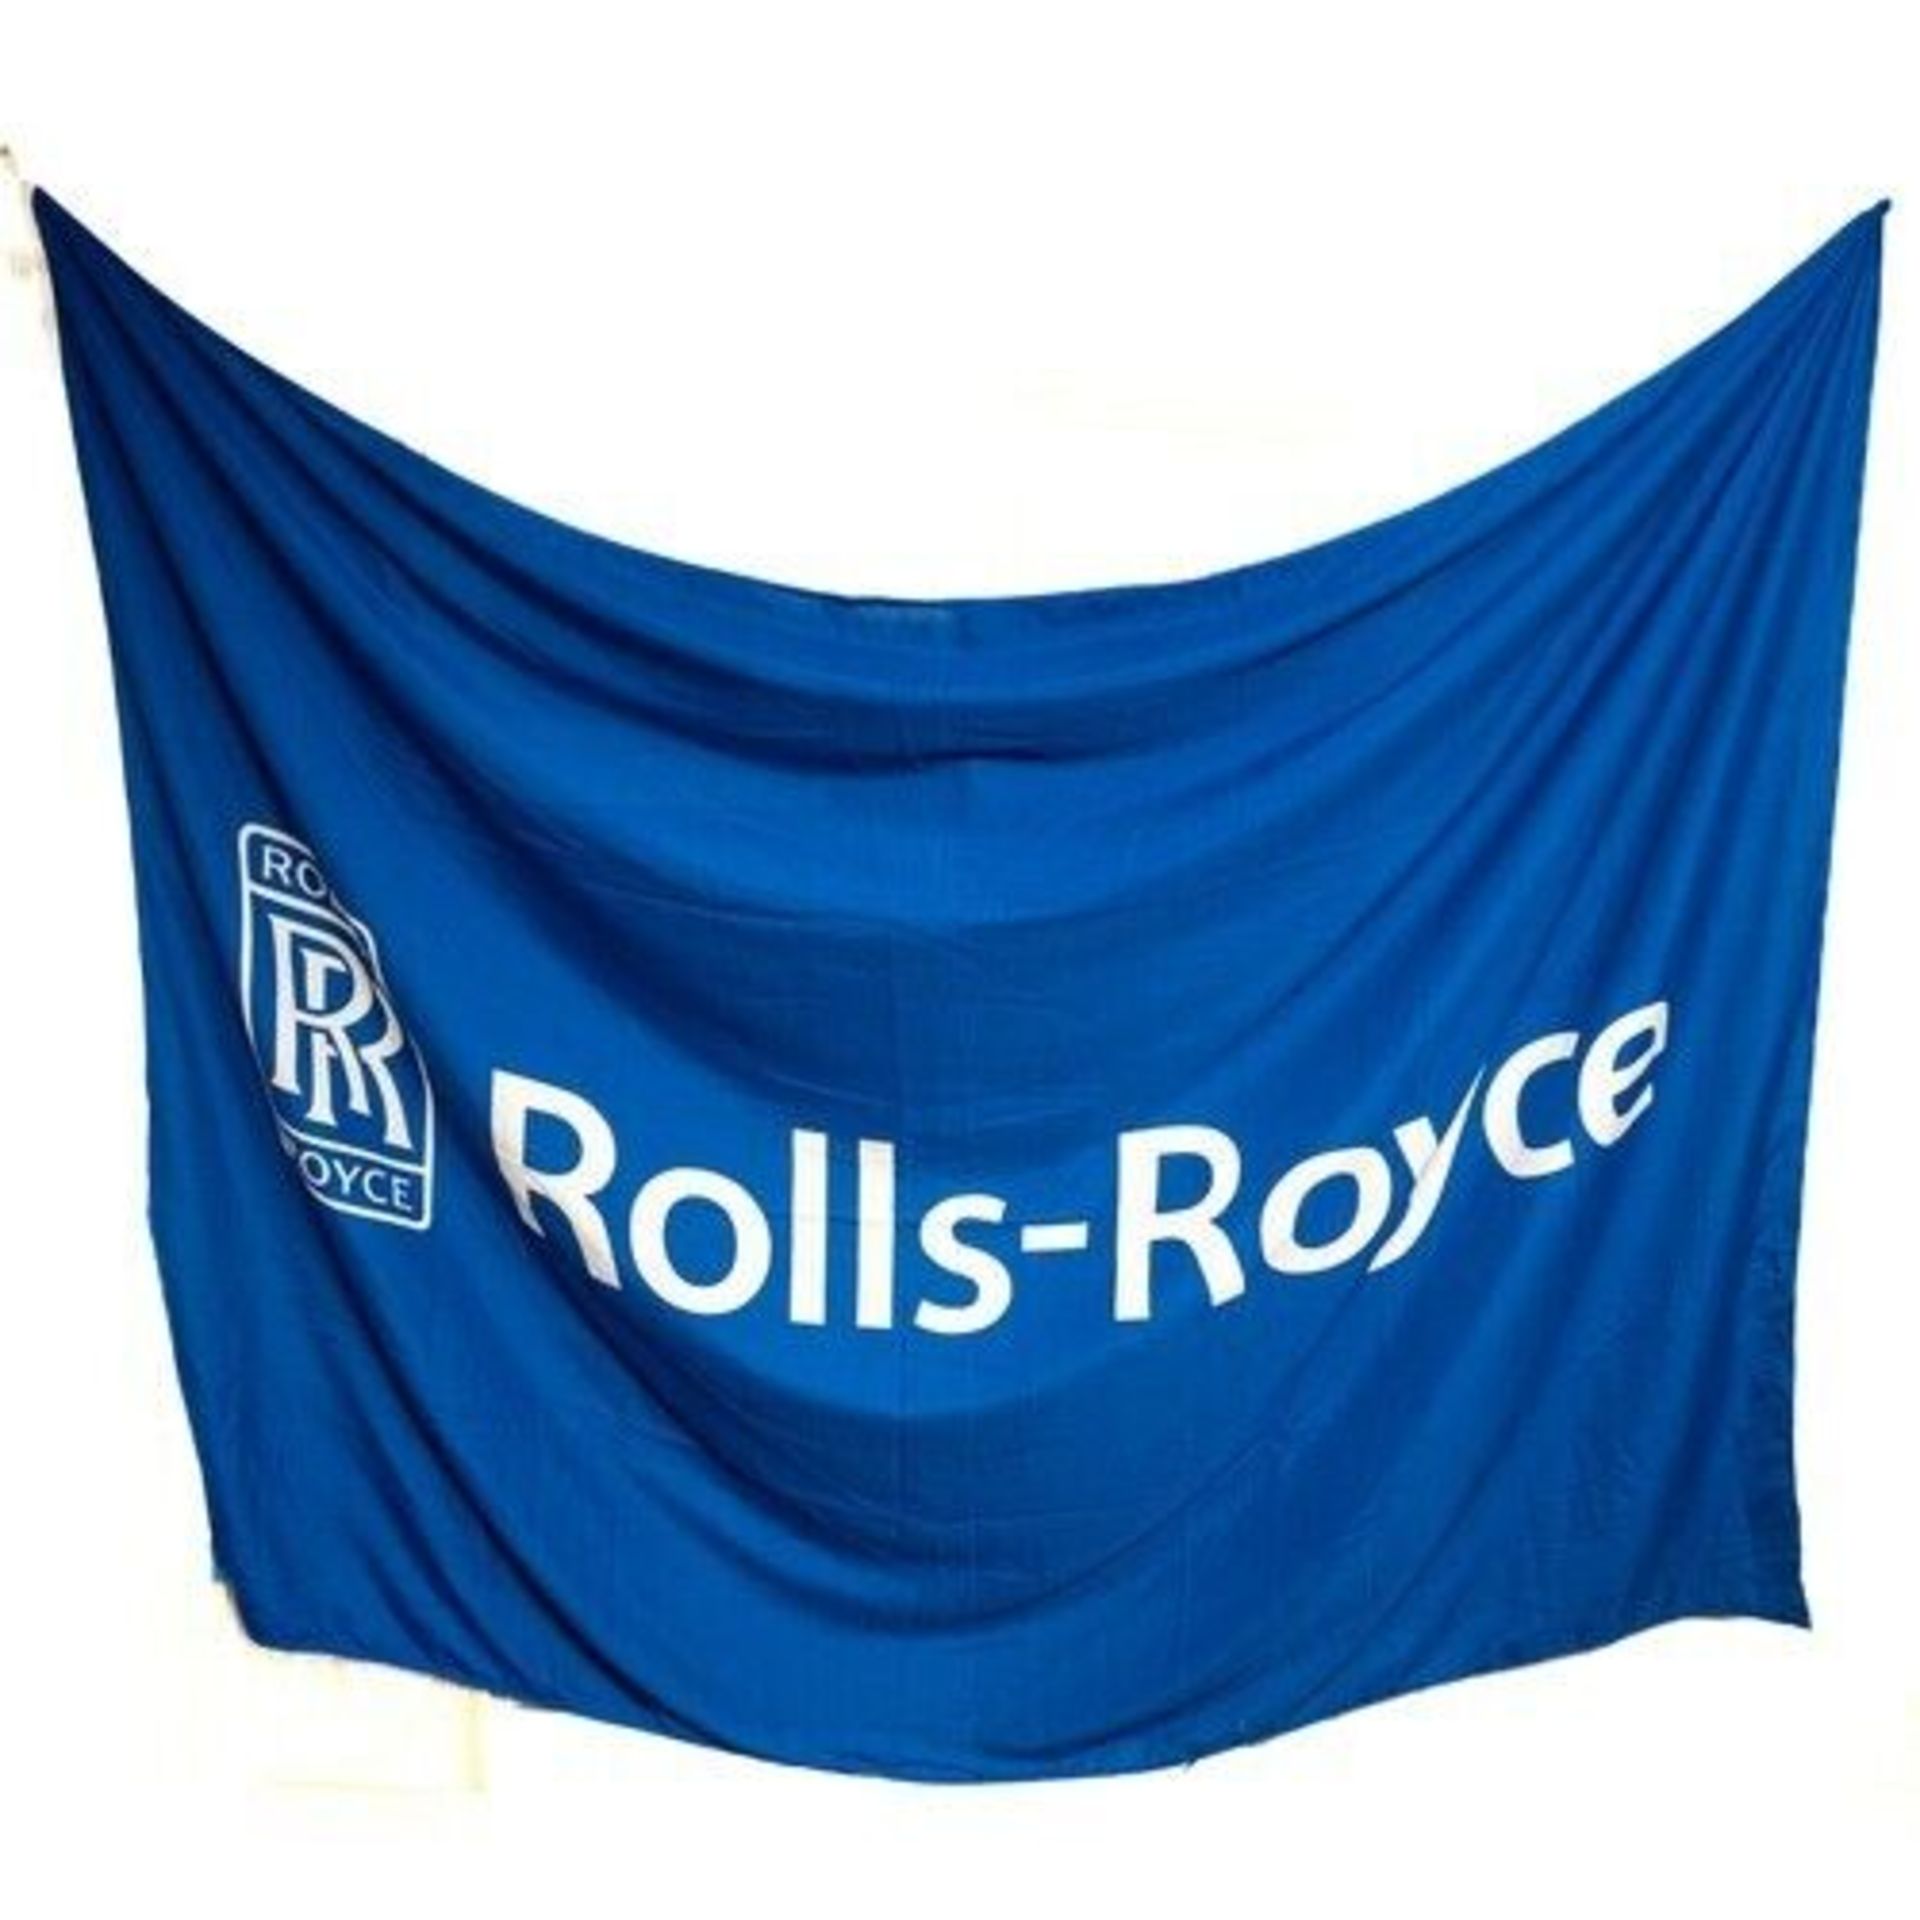 Rolls Royce flag, in brand new condition, with metal clasps, approx 6ft x 8ft - Image 2 of 3